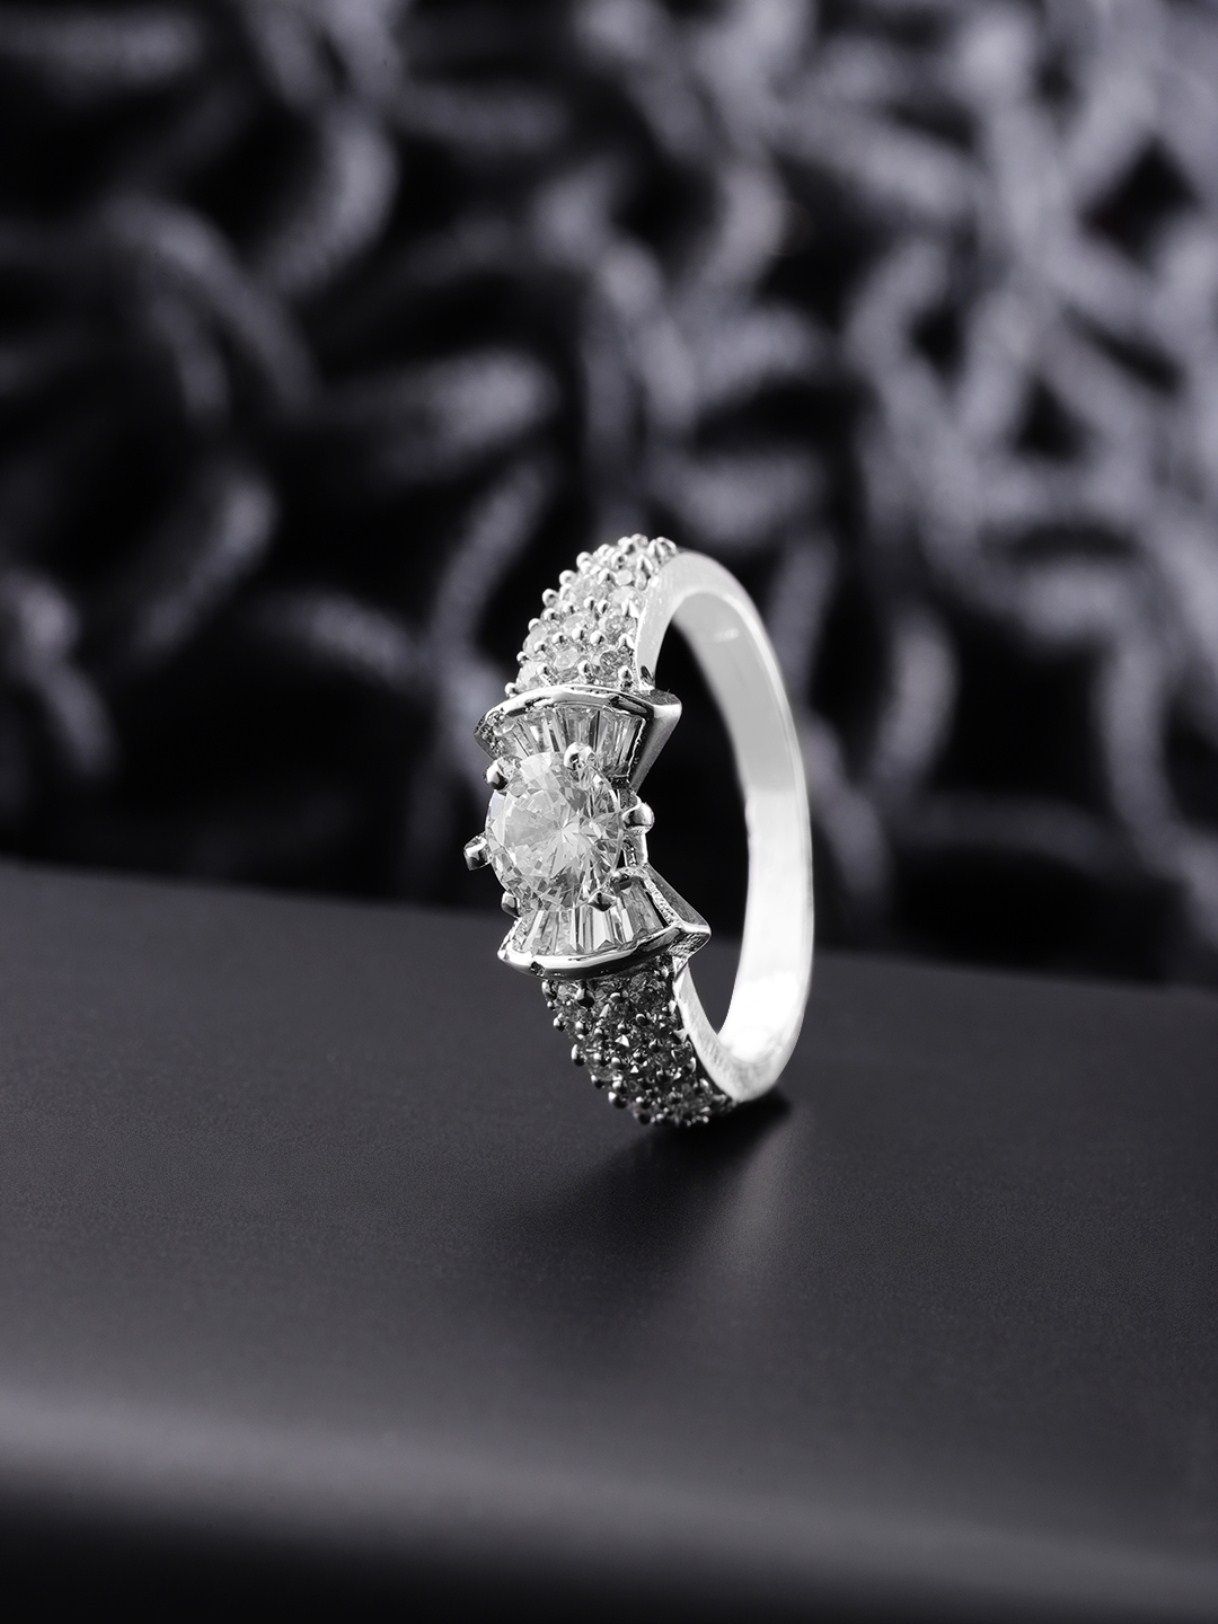 Priyaasi Stylish Silver Plated Cz Studded Ring For Women And Girls Buy Priyaasi Stylish Silver Plated Cz Studded Ring For Women And Girls Online At Best Price In India Nykaa